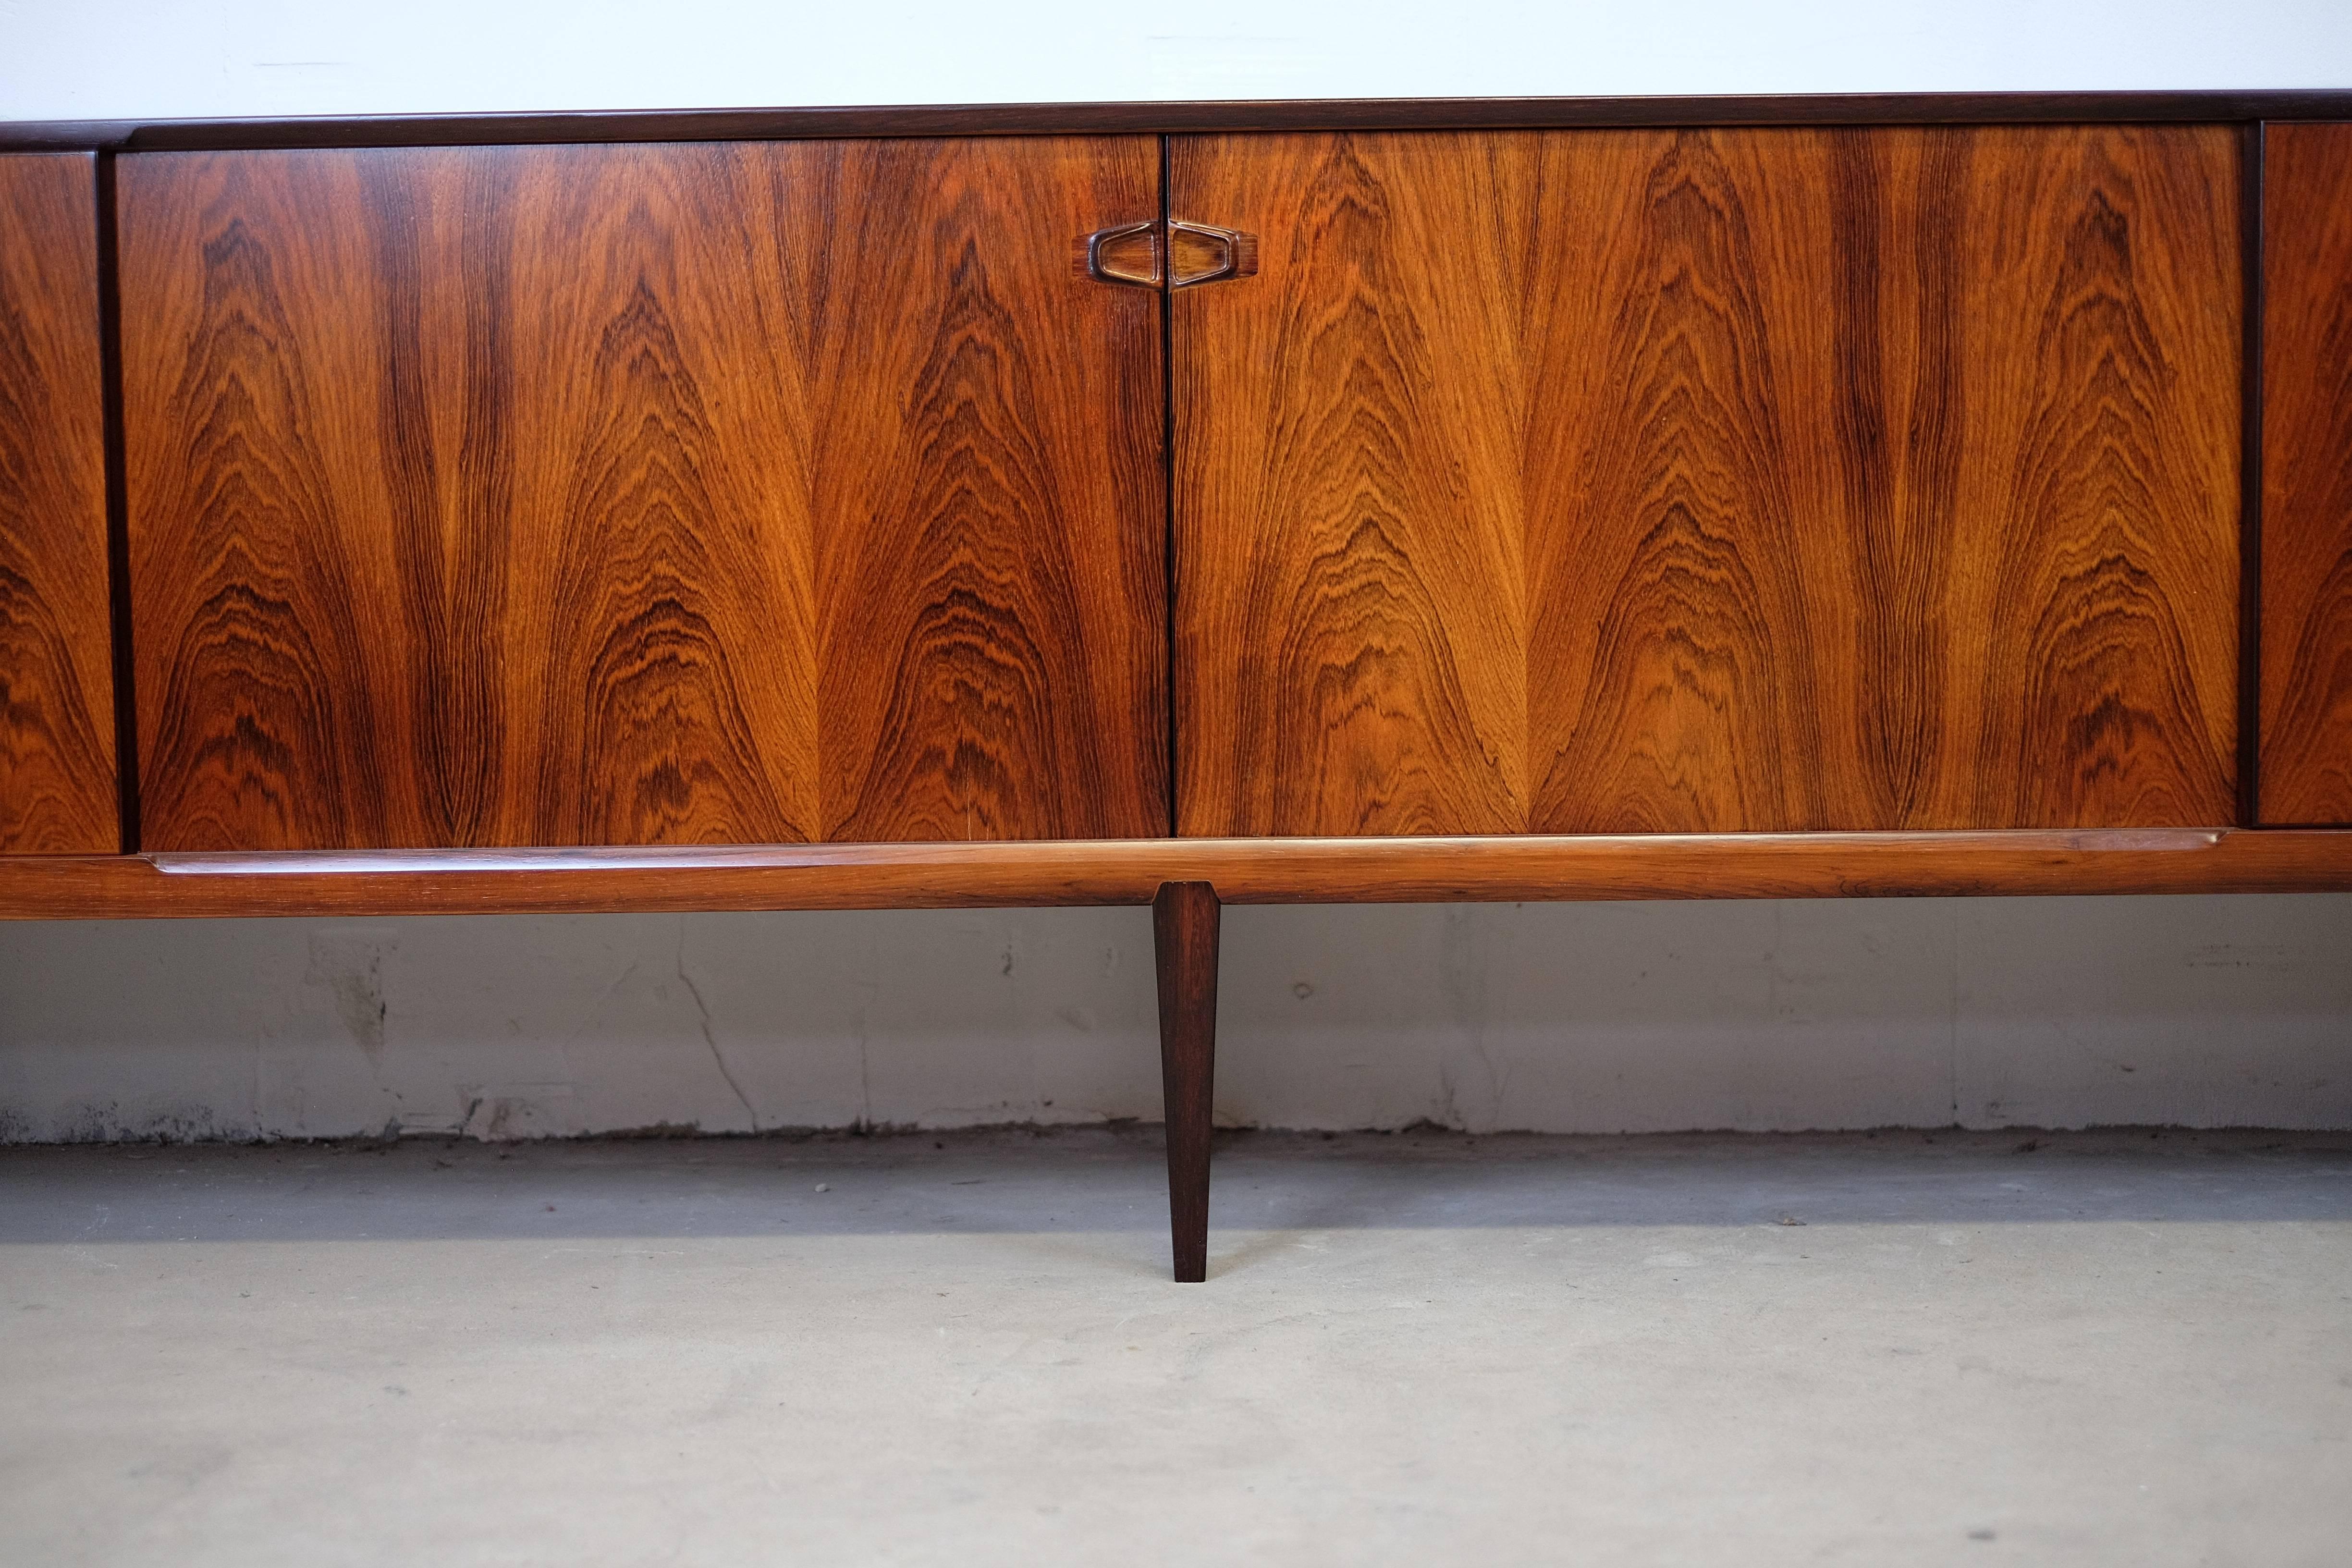 Look at this stunning long sideboard by Rosengren Hansen for Brande Møbler.
The rosewood is incredible beautiful!

This piece is allmost in mint condition. Inside complete, with all drawers. Four beautiful sliding doors with some amazing grips.